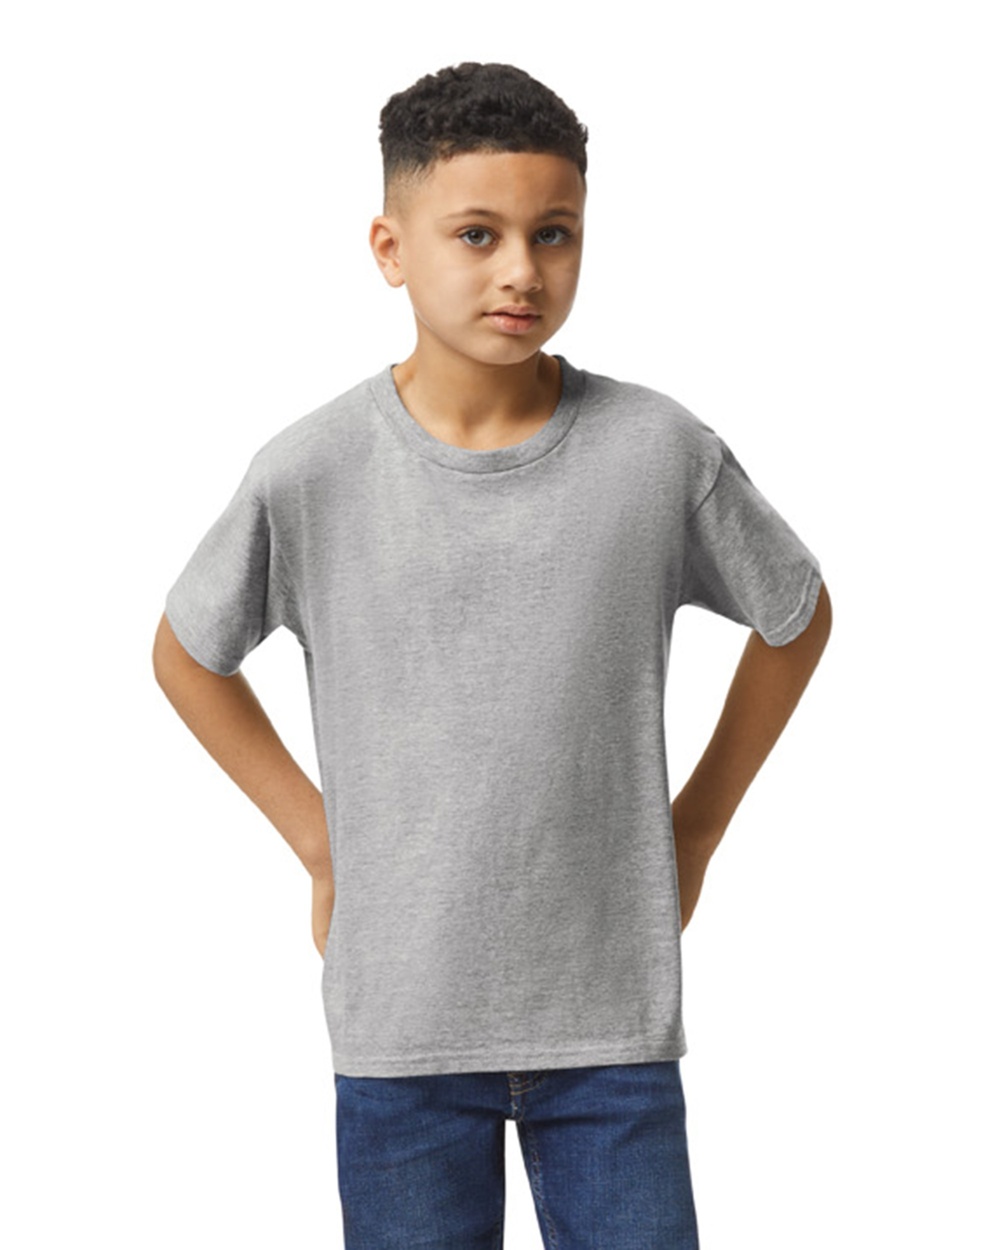 GD64000B - Softstyle® Youth T-Shirt - One Stop